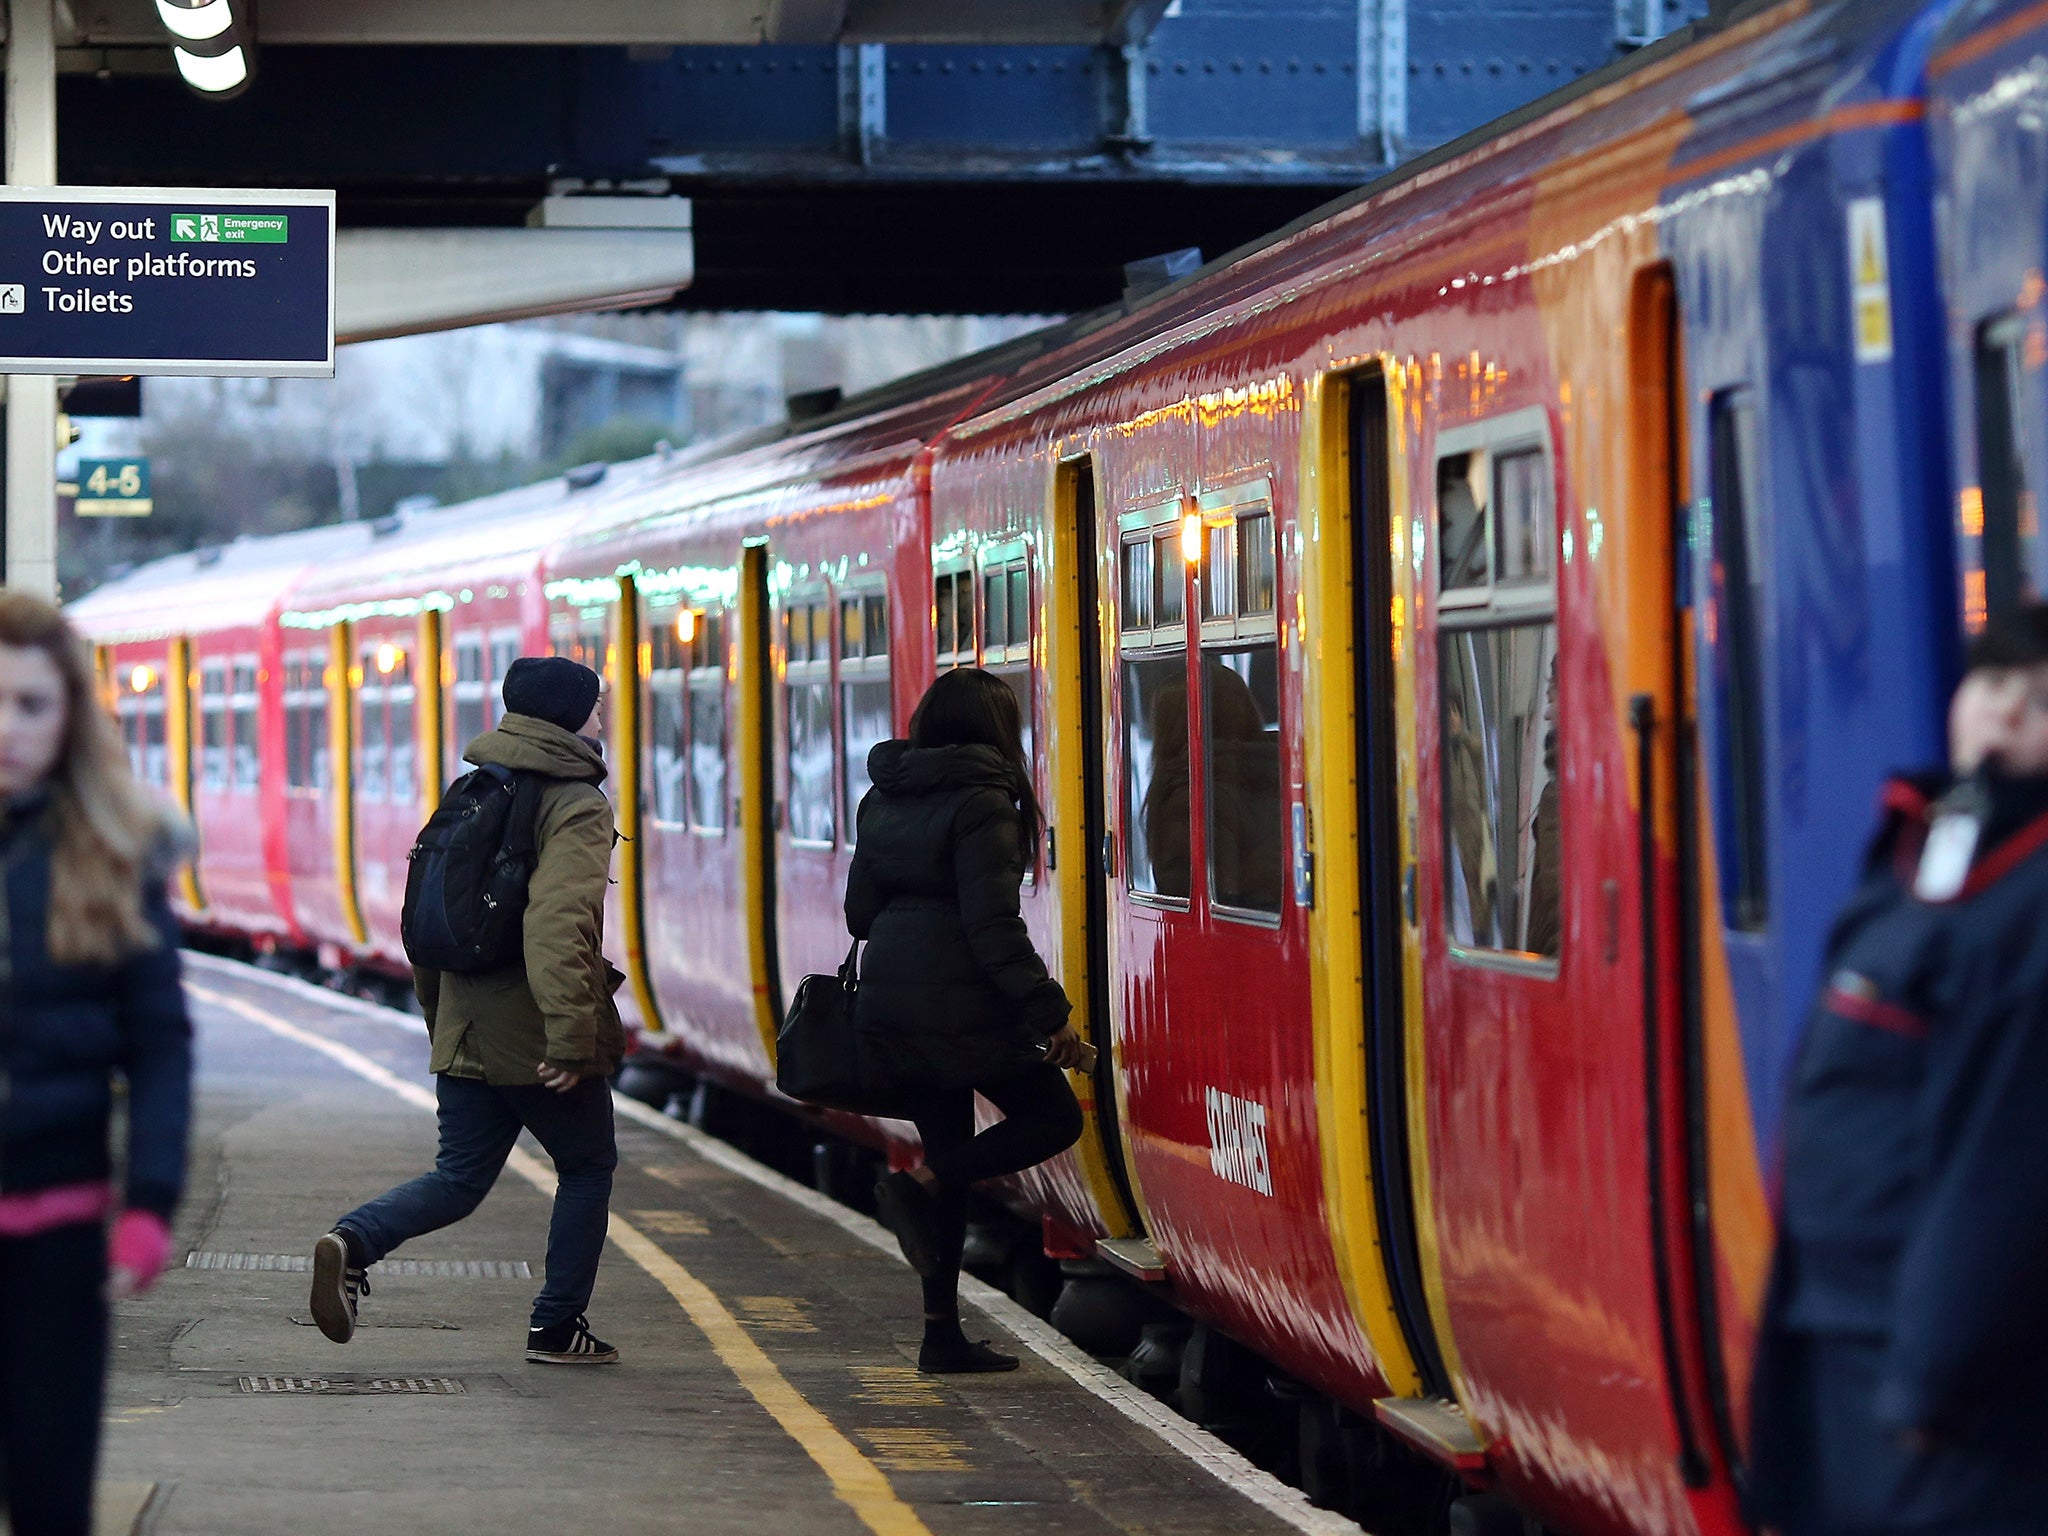 The nation’s railways will close as usual on Christmas Day